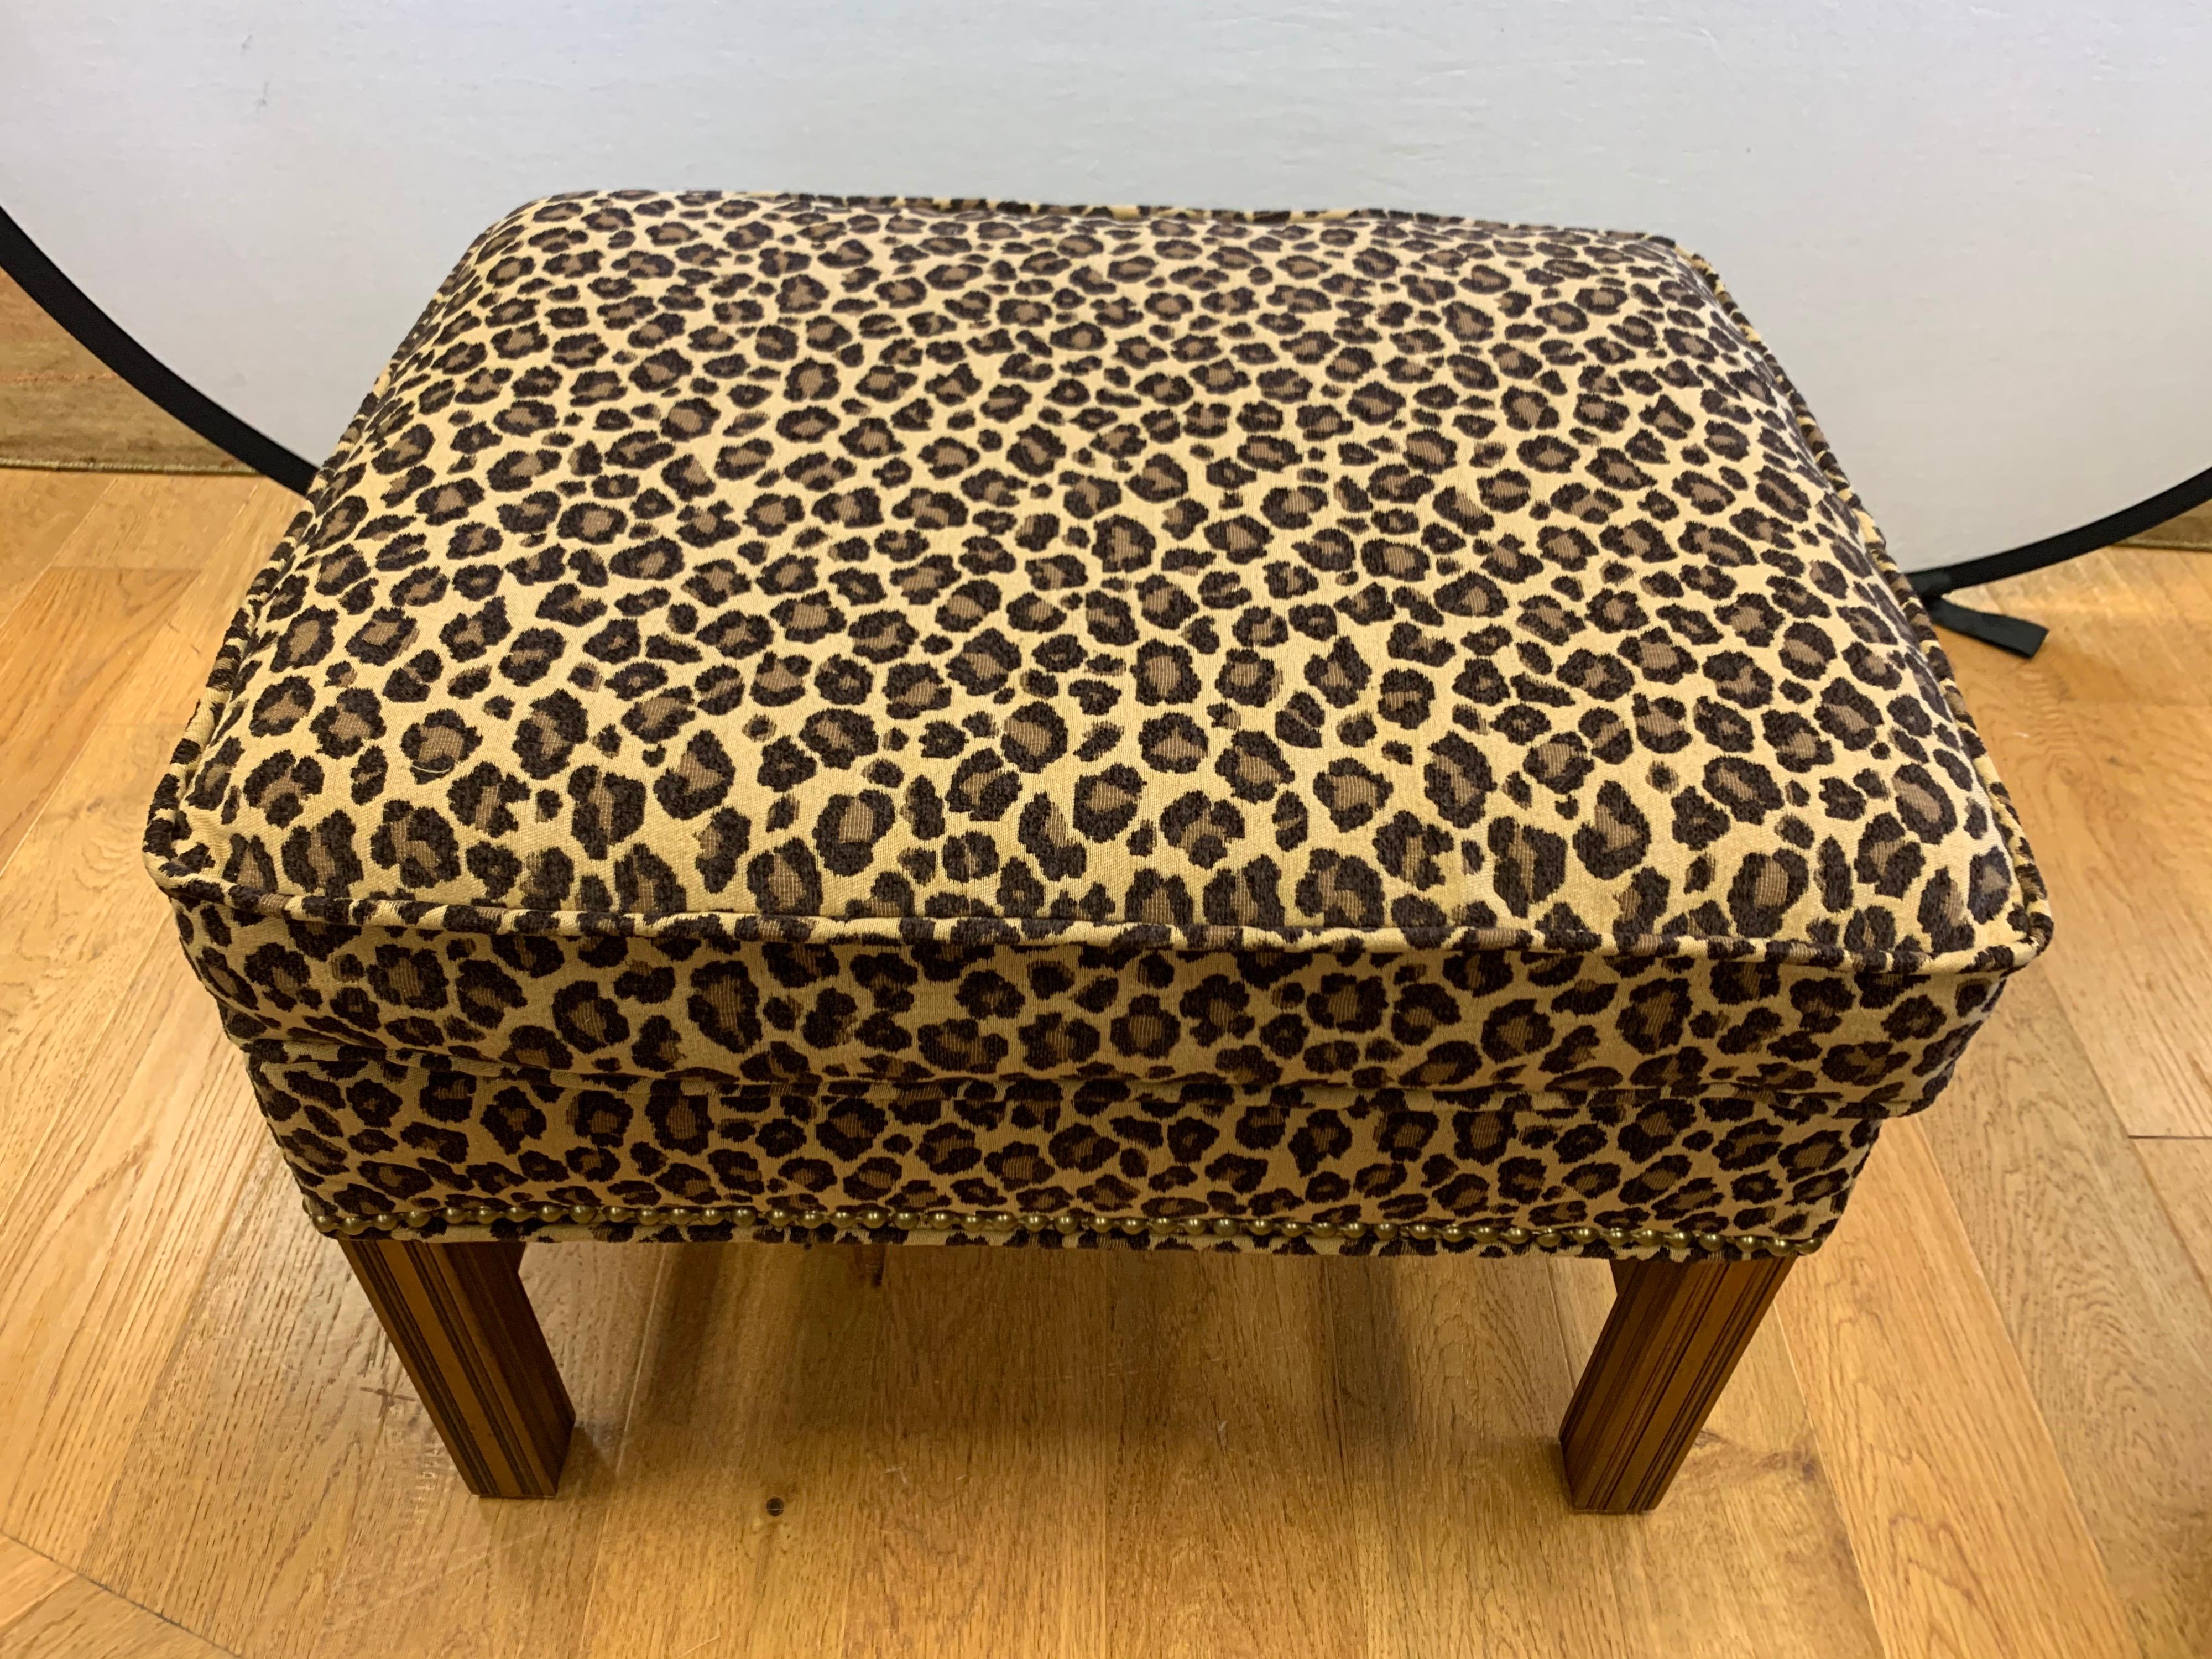 American Pair of Berhardt Leopard Print Ottomans Stools Nailhead Newly Upholstered